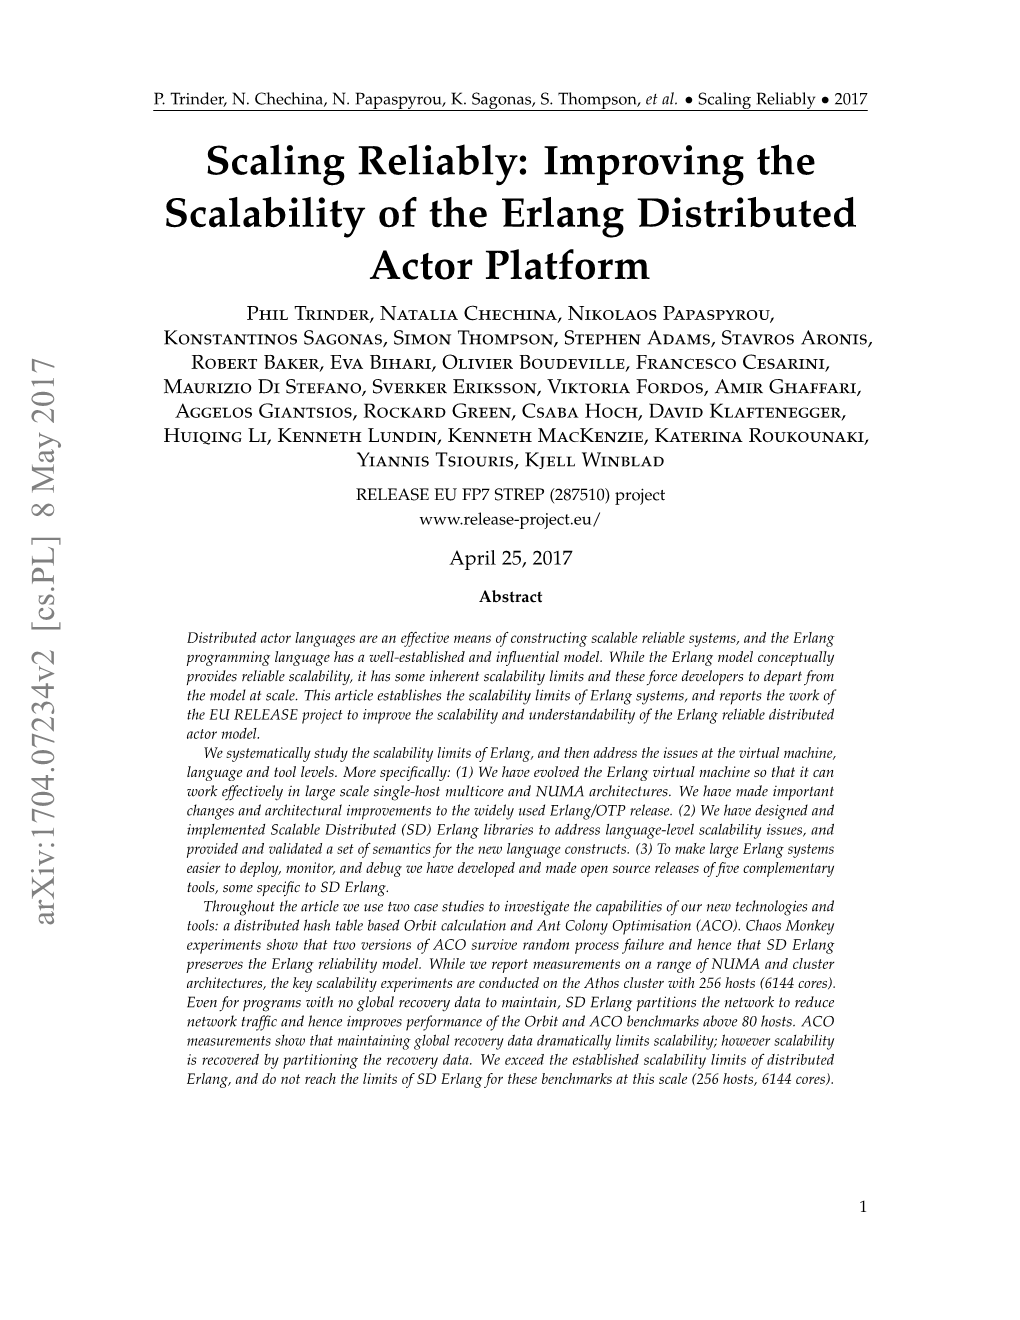 Improving the Scalability of the Erlang Distributed Actor Platform